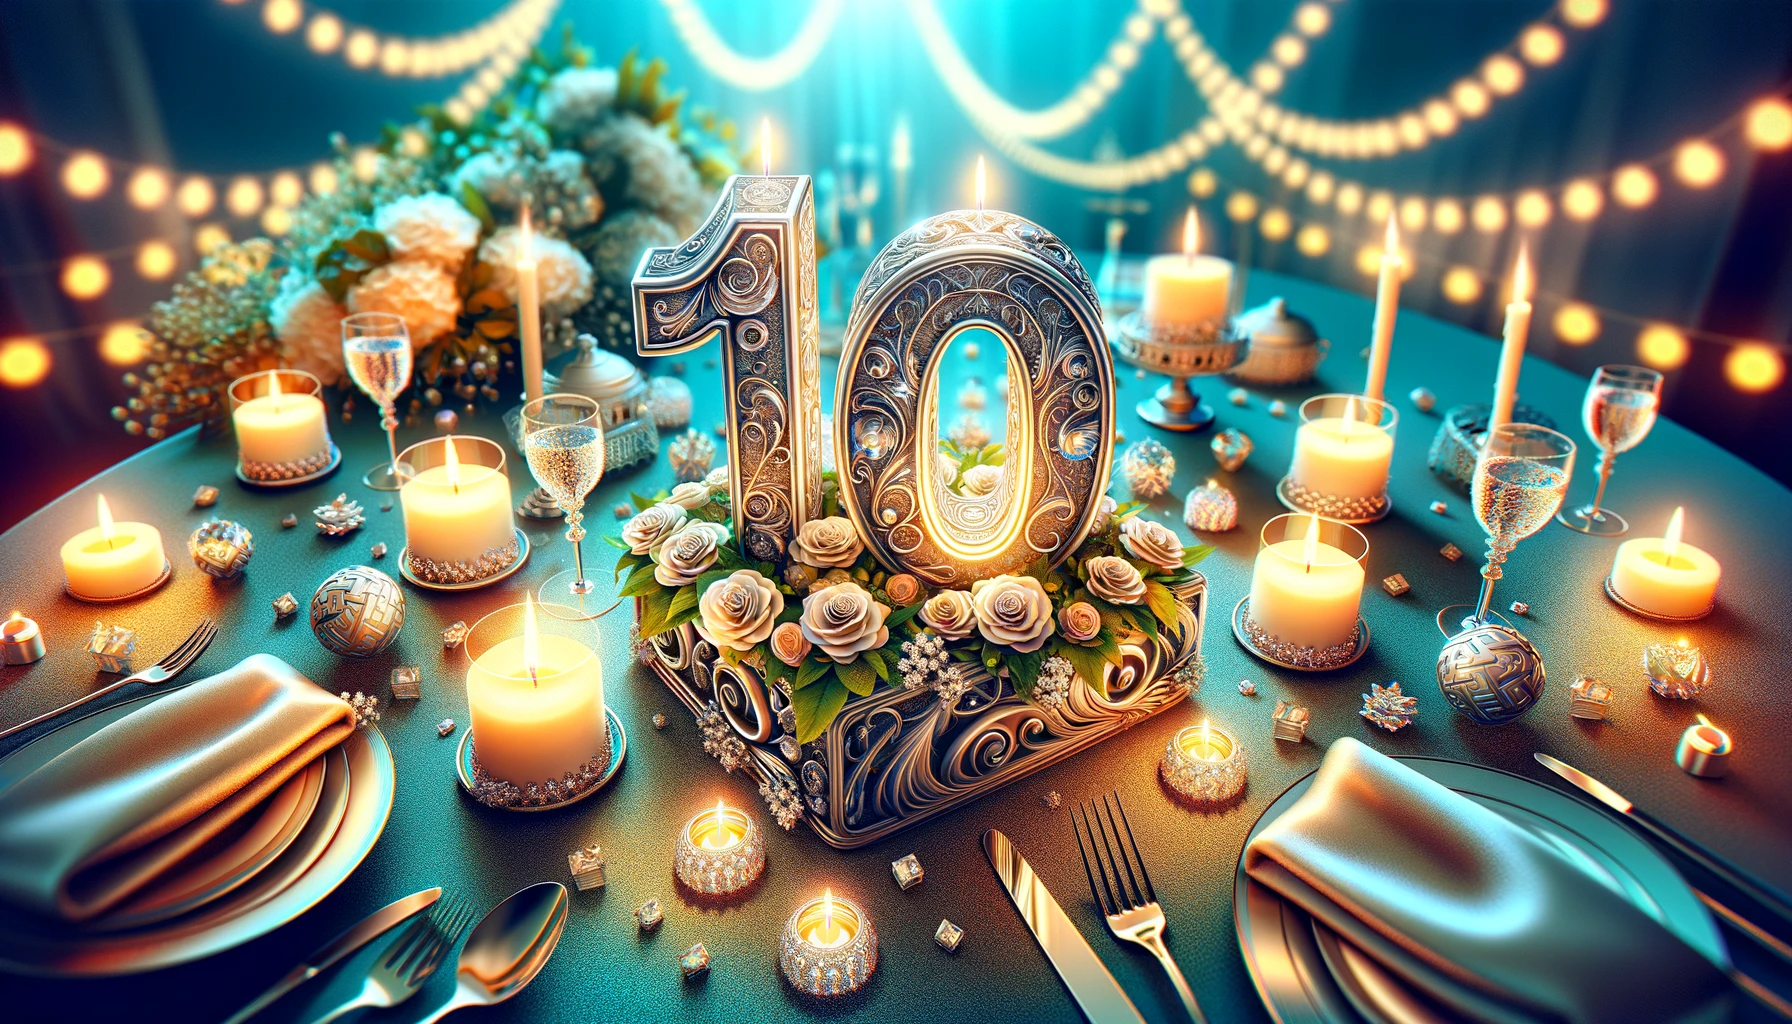 A vibrant and celebratory image ideal for a 10th wedding anniversary article